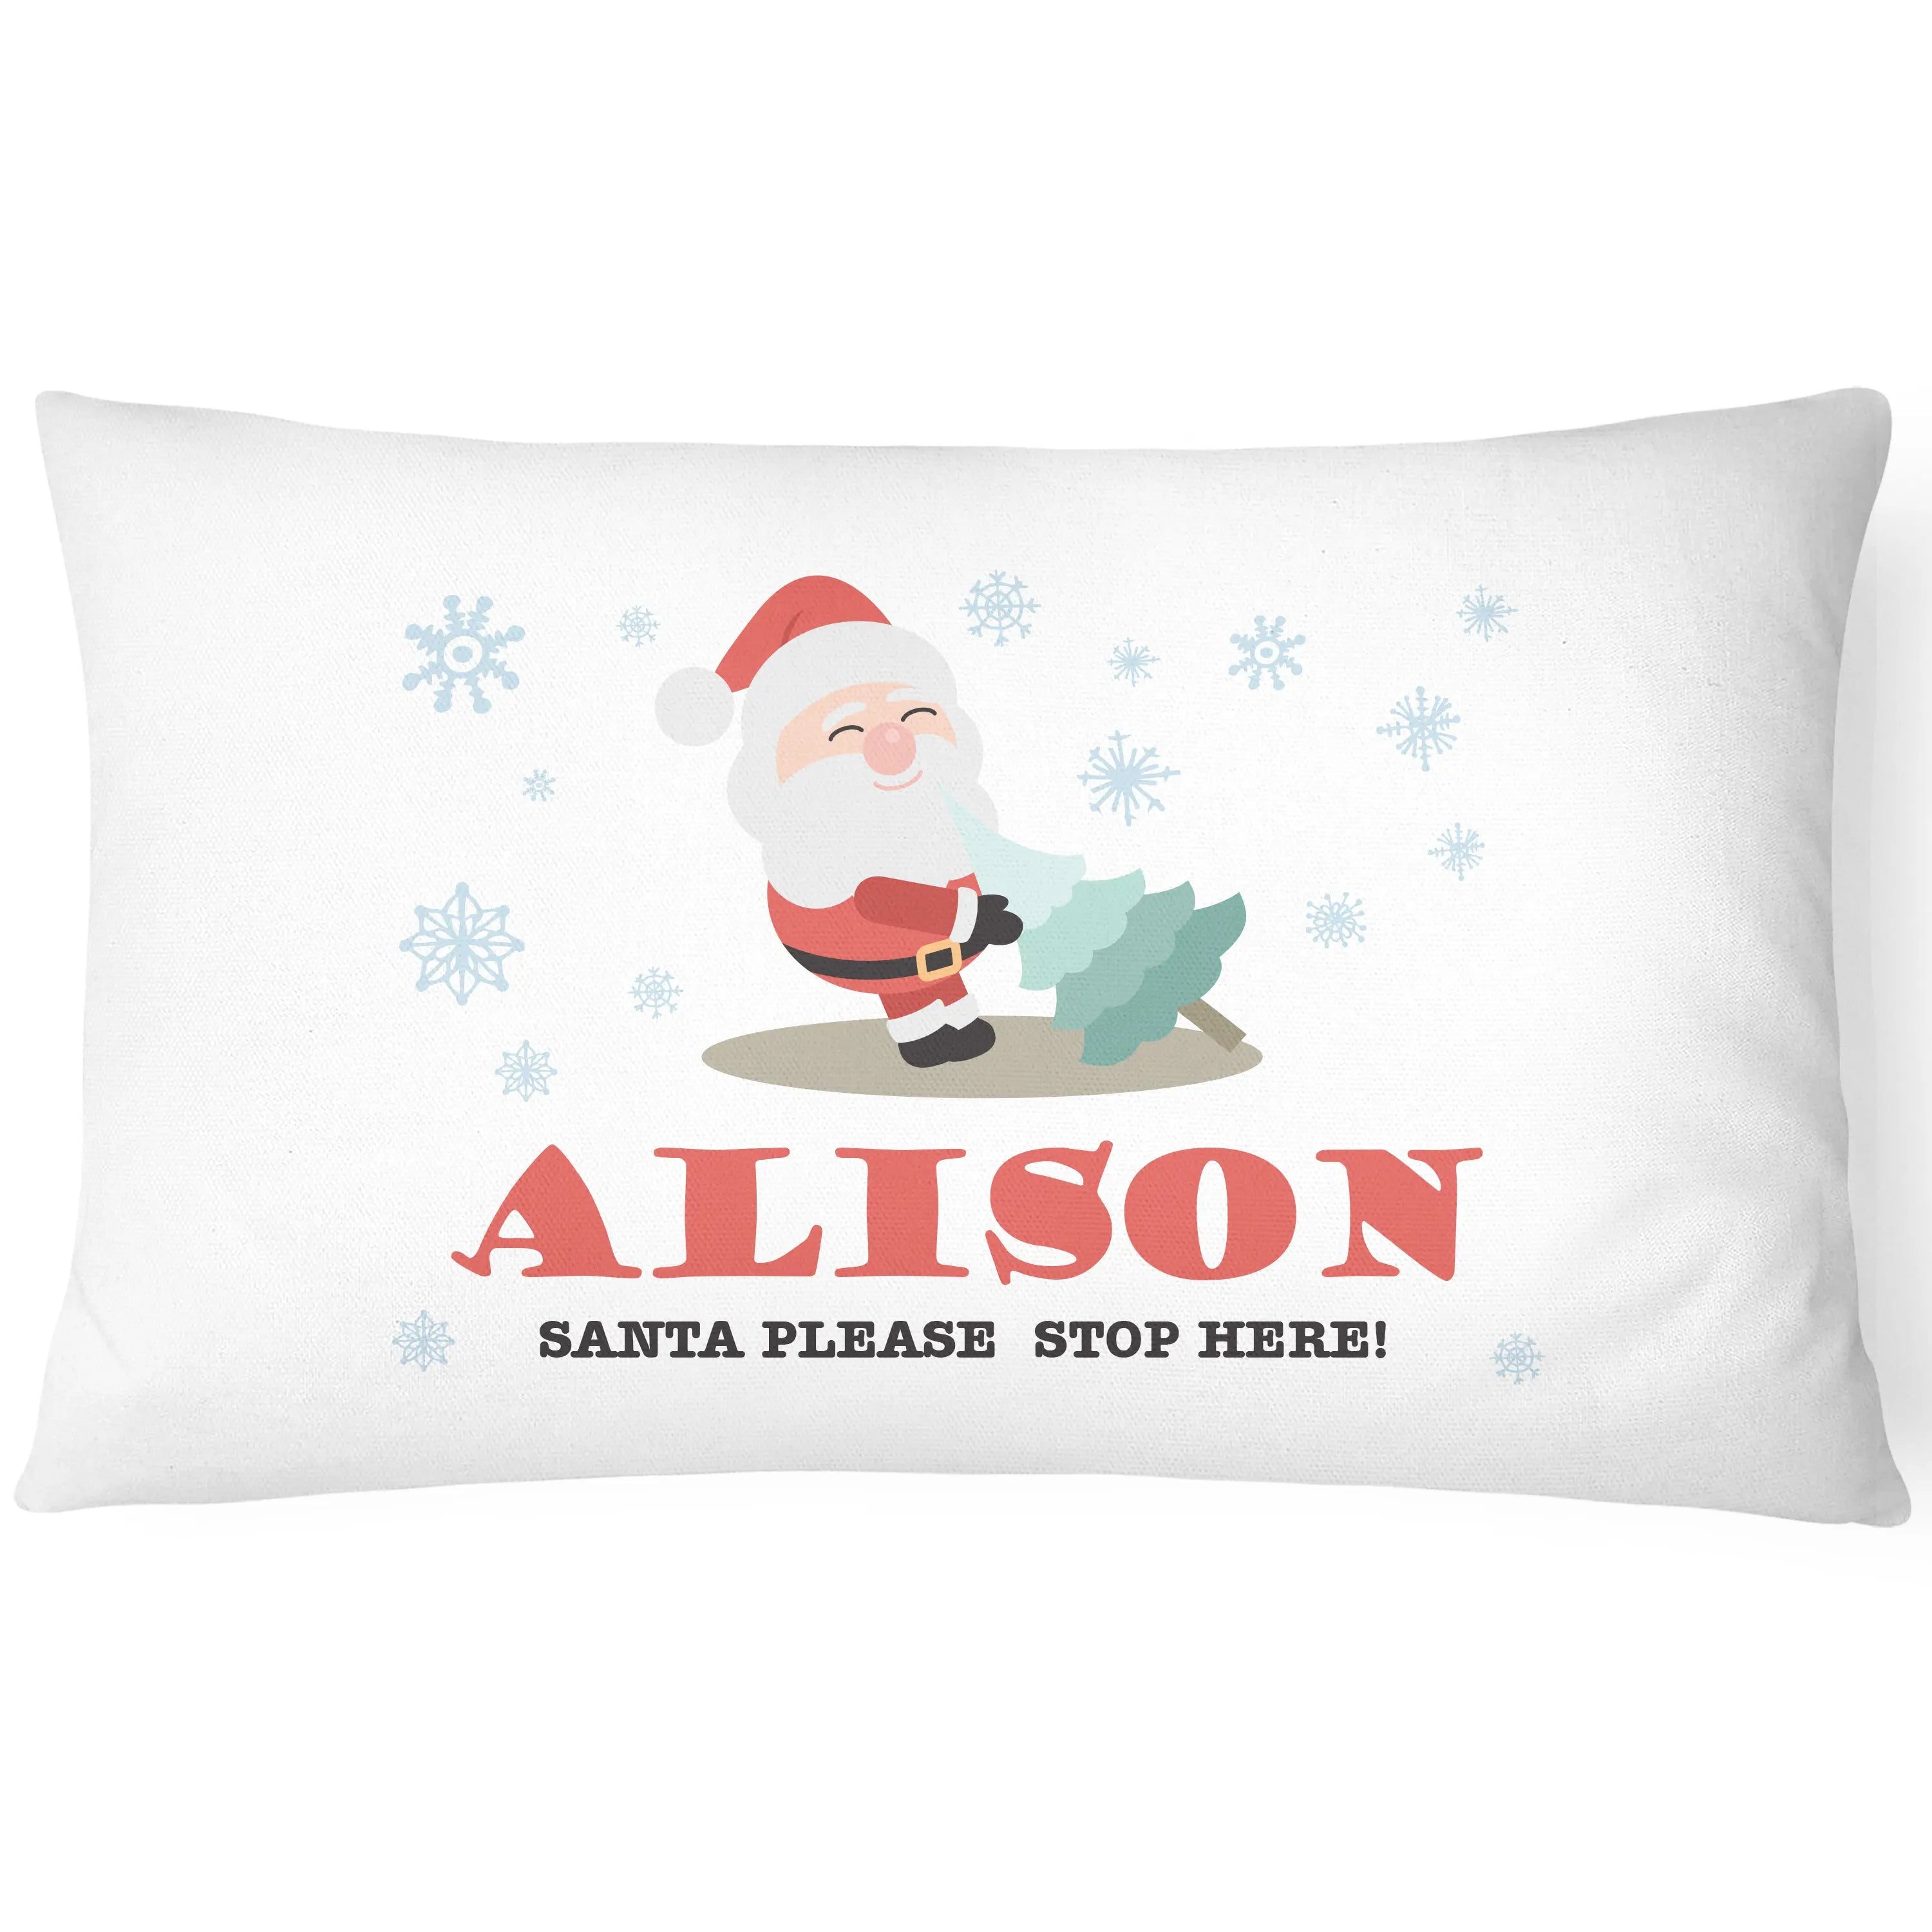 ChristmasPillowcase for Kids - Personalise With Any Name - Perfect Children's Gift - Santa - CushionPop